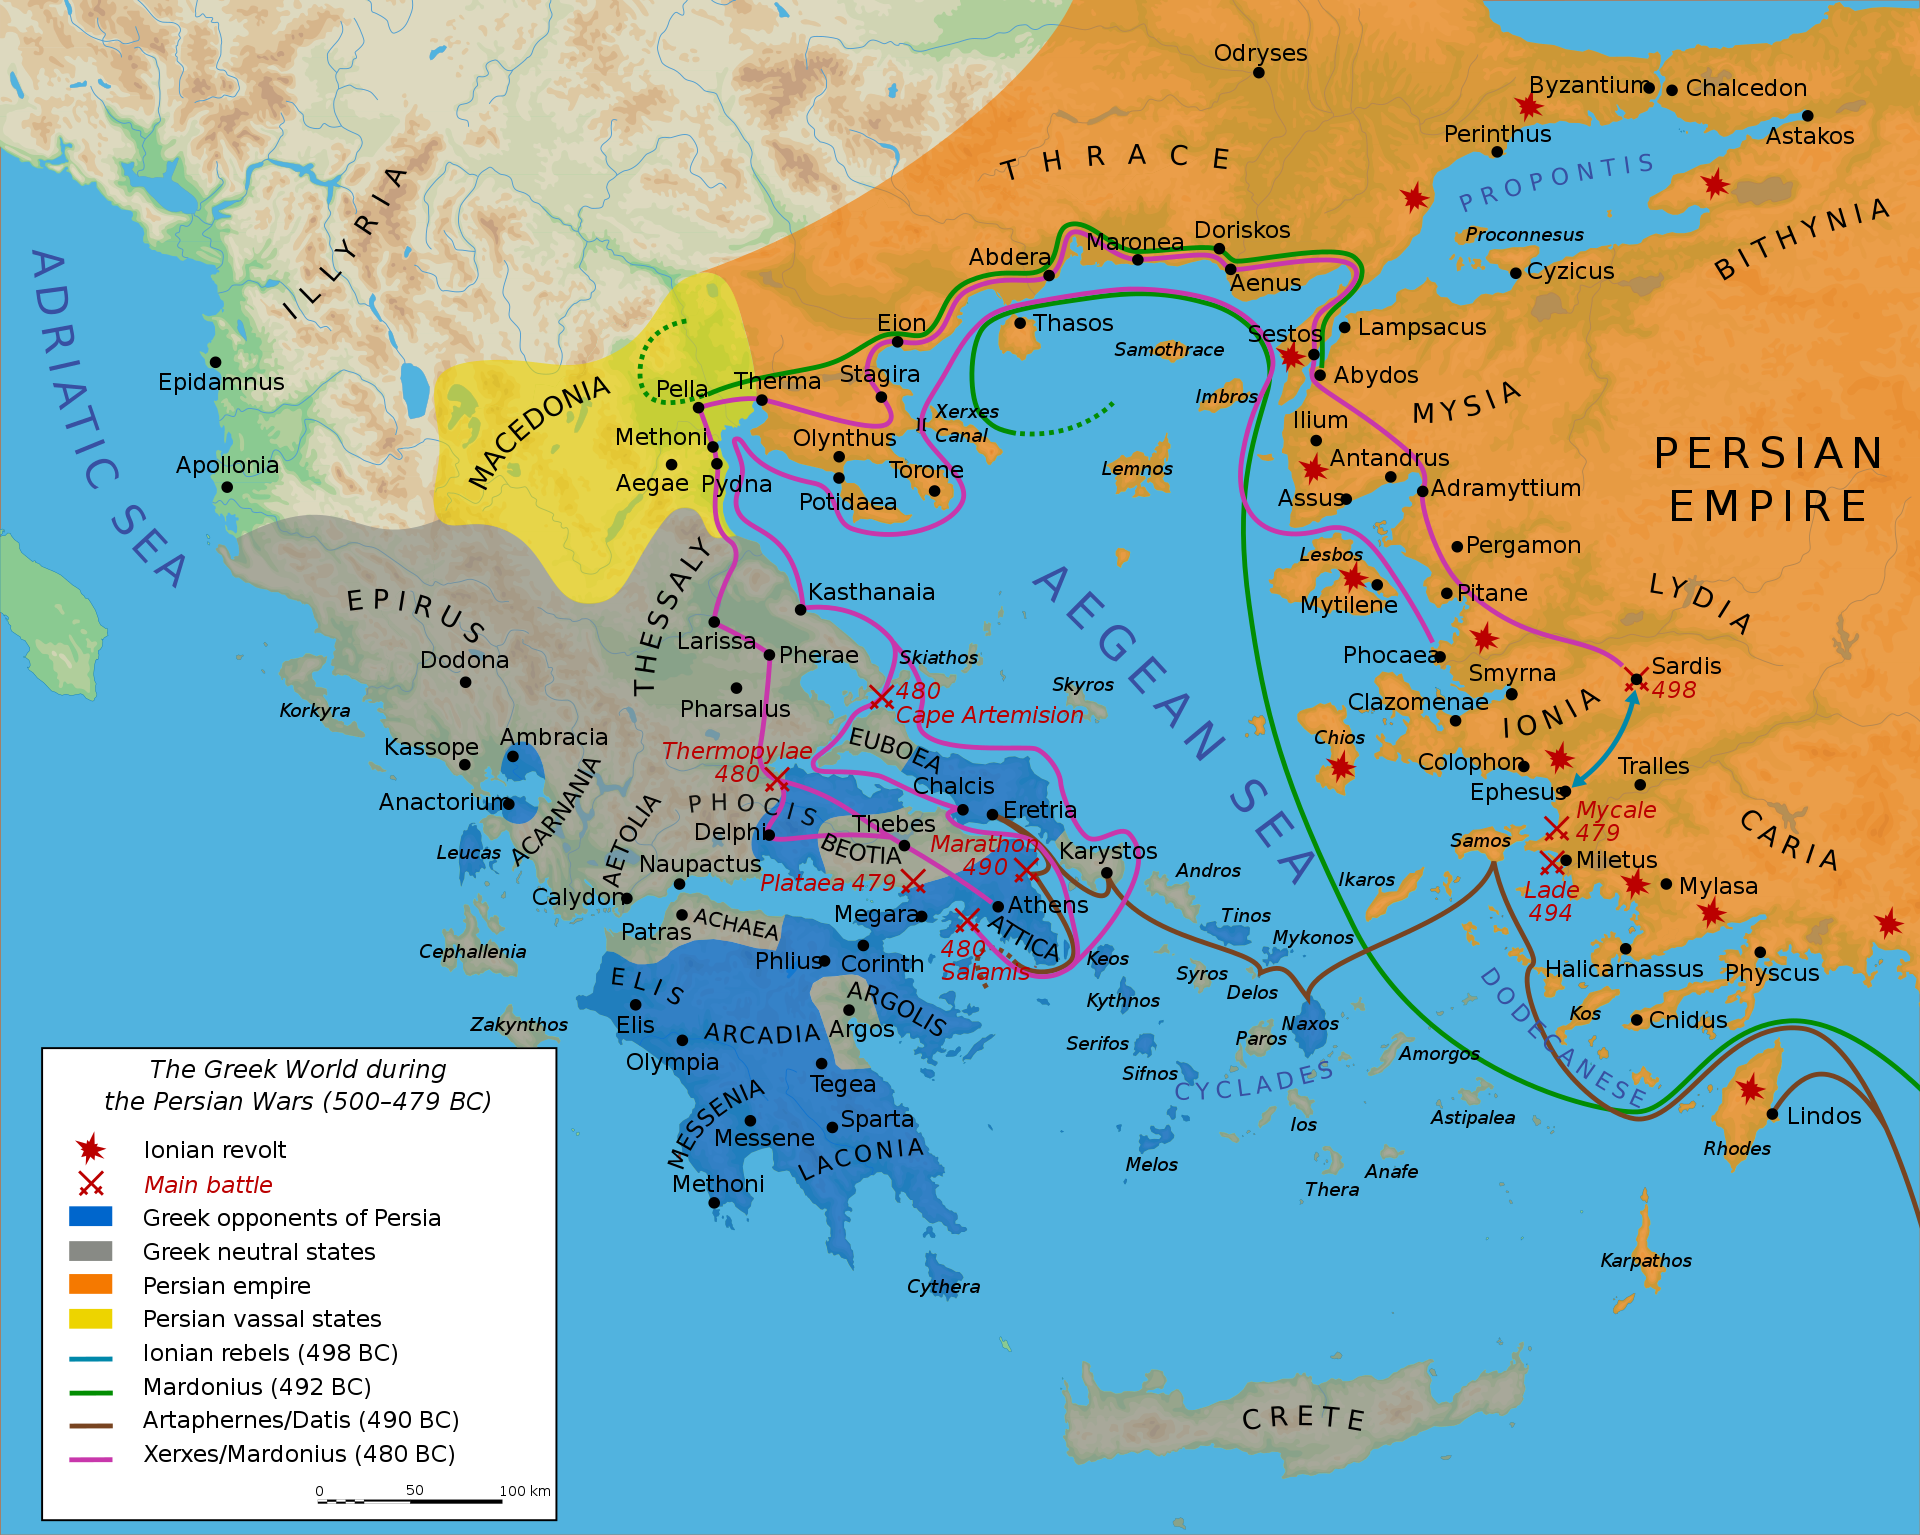 A map showing the territories of Greece and the Persian Empire ands the movements of either side's armies